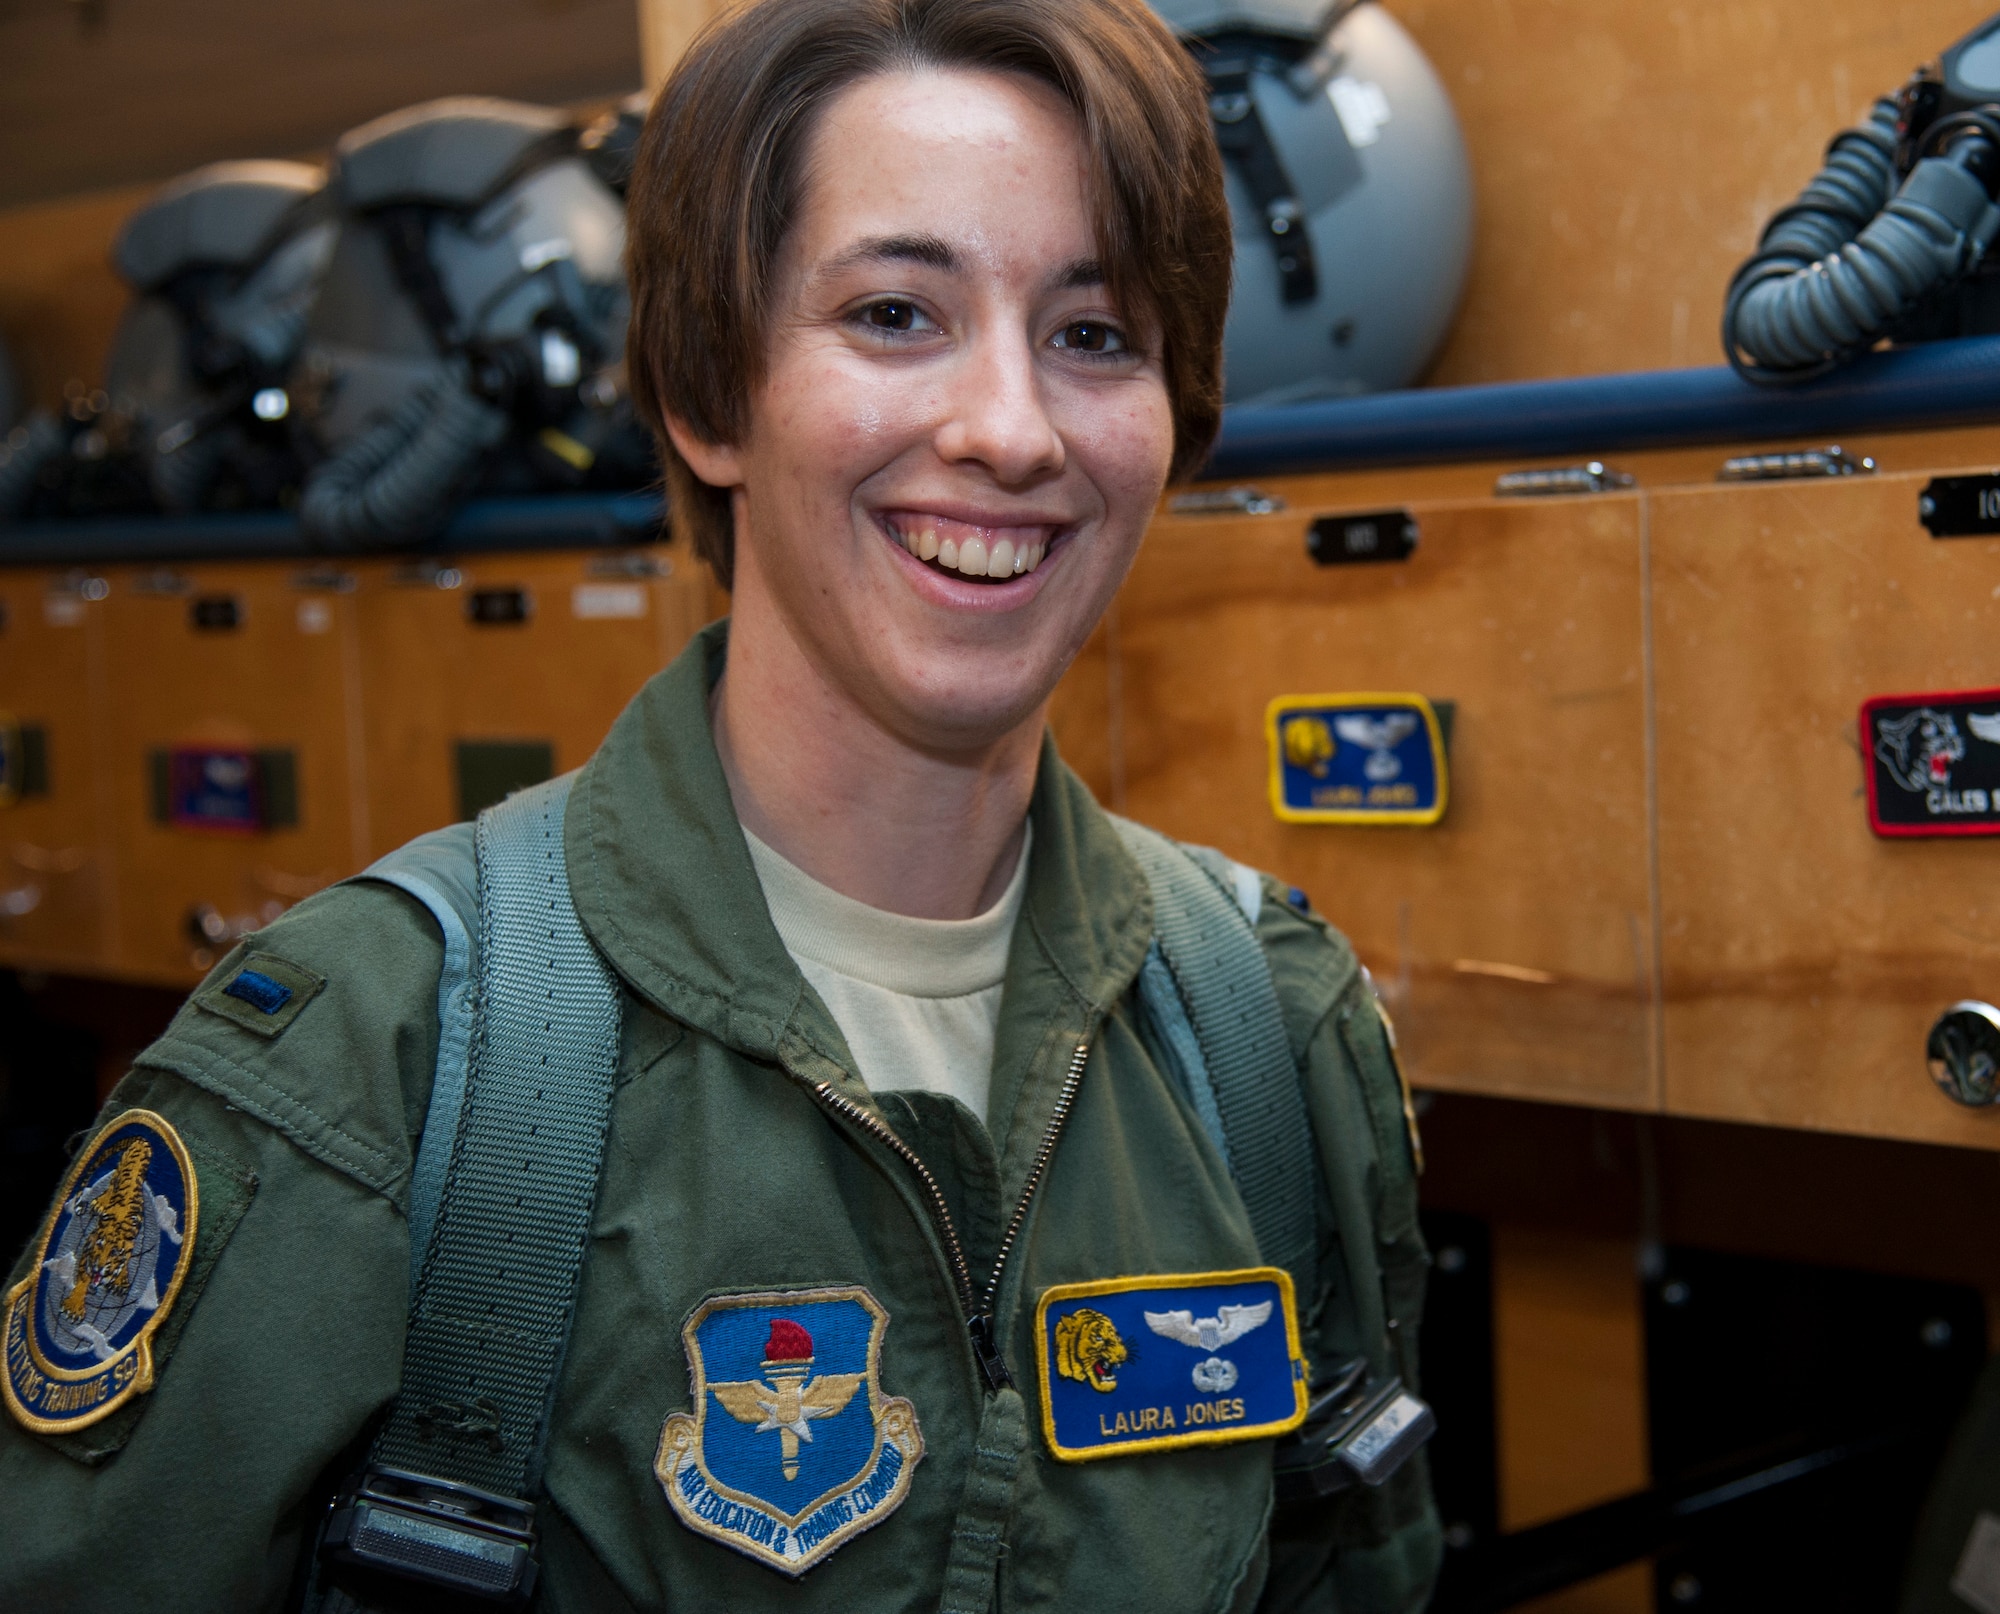 1st Lt. Laura Jones, 85th Flying Training Squadron T-6A Texan II instructor pilot, poses for a photo after harnessing up and getting ready to fly at Laughlin Air Force Base, Texas, April 21, 2014. Jones was involved in an automobile accident in January that kept her from flying for three months. (U.S. Air Force photo/Airman 1st Class Jimmie D. Pike/Released)